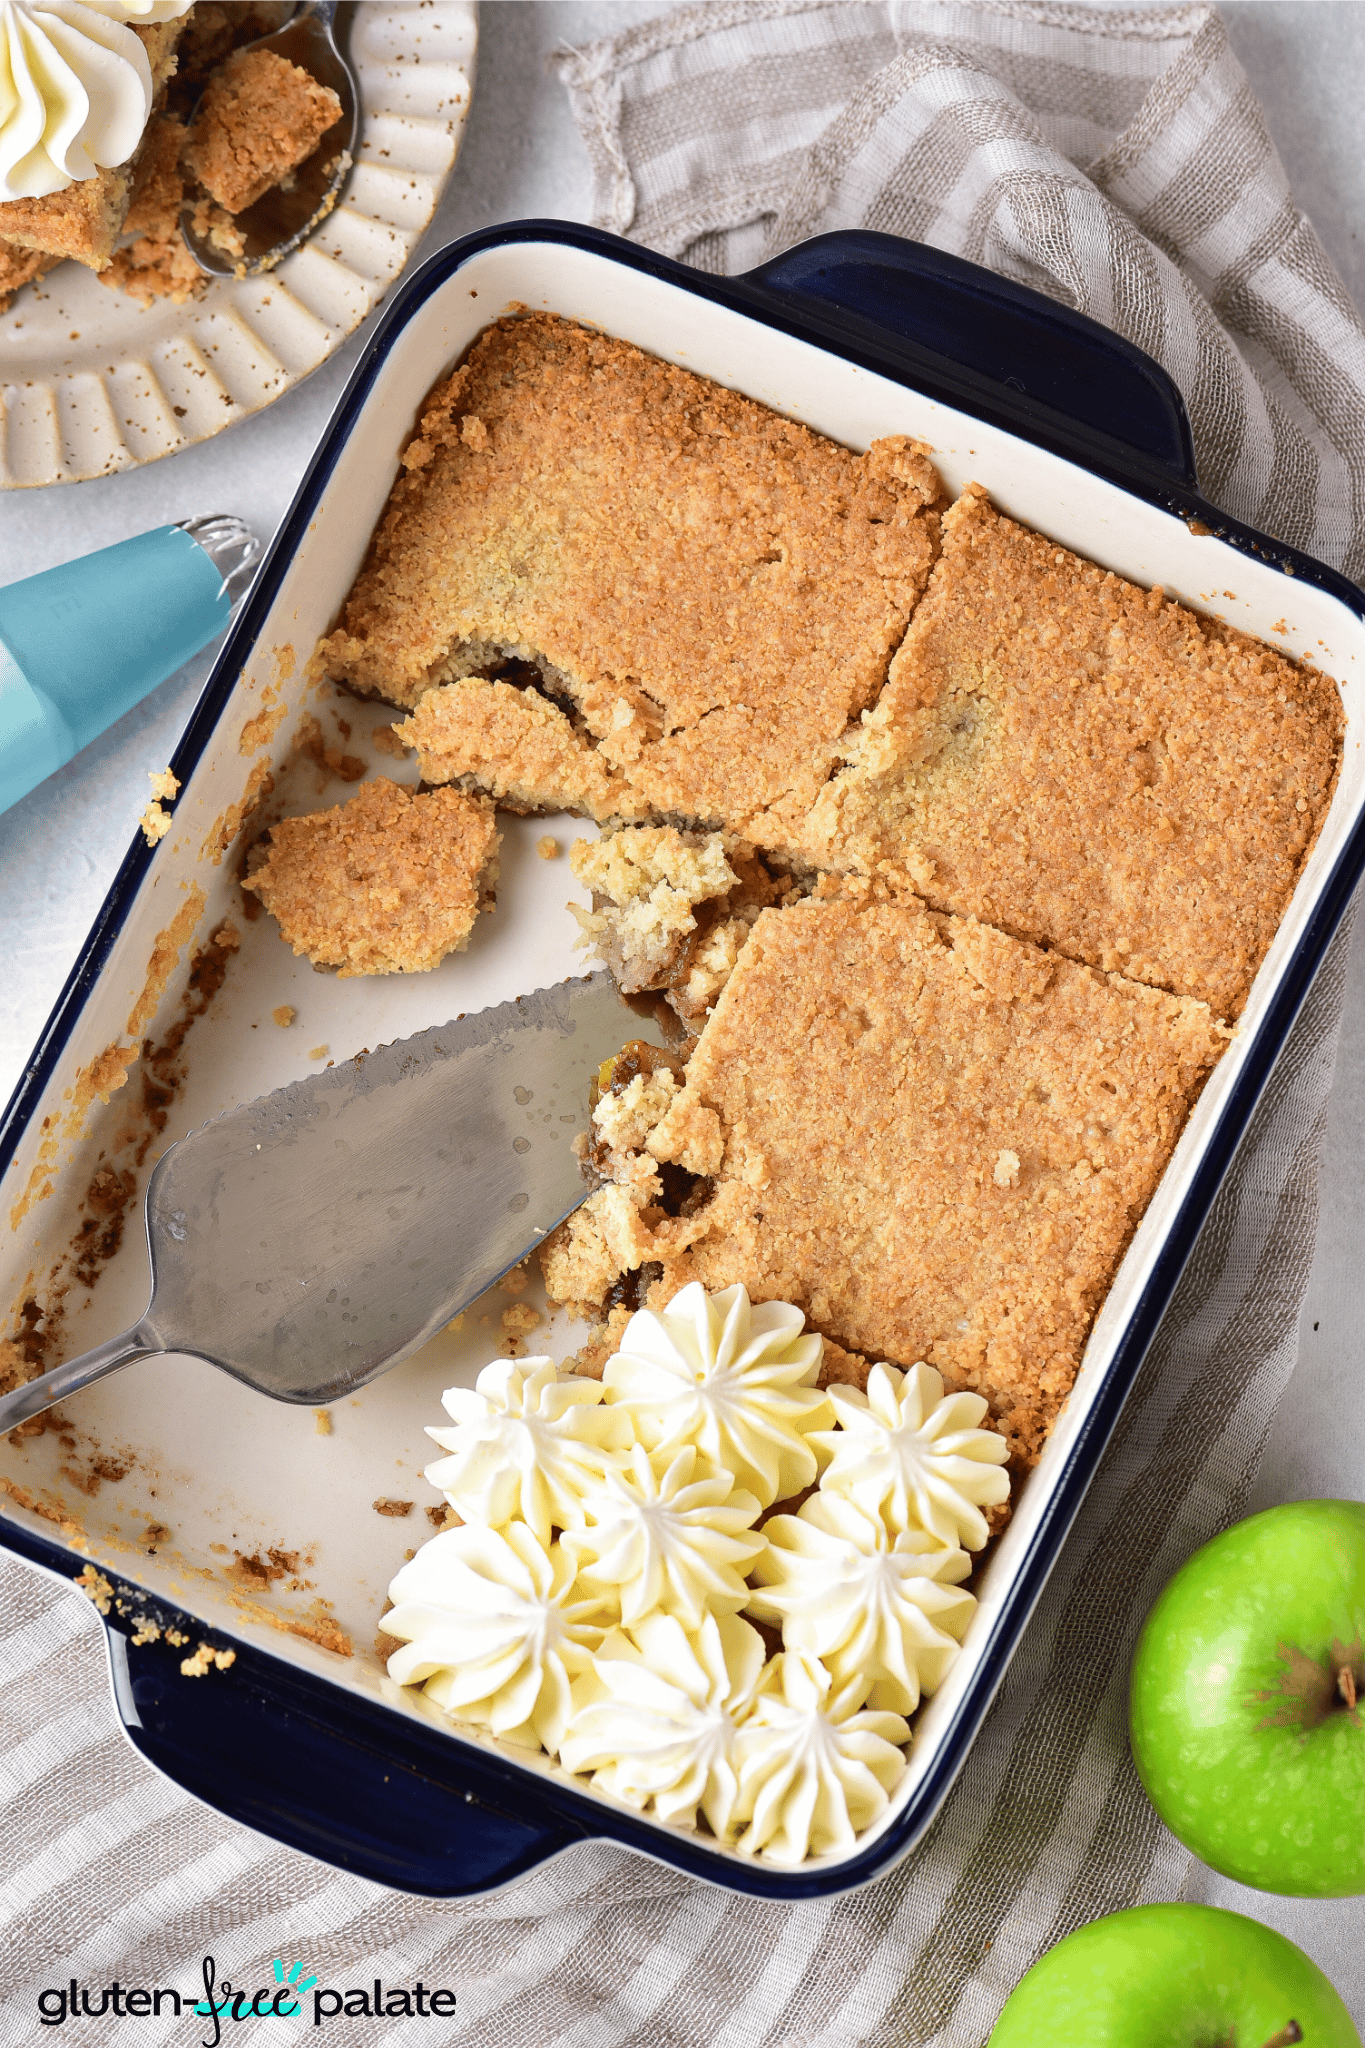 gluten-free apple crumble in a baking plate.